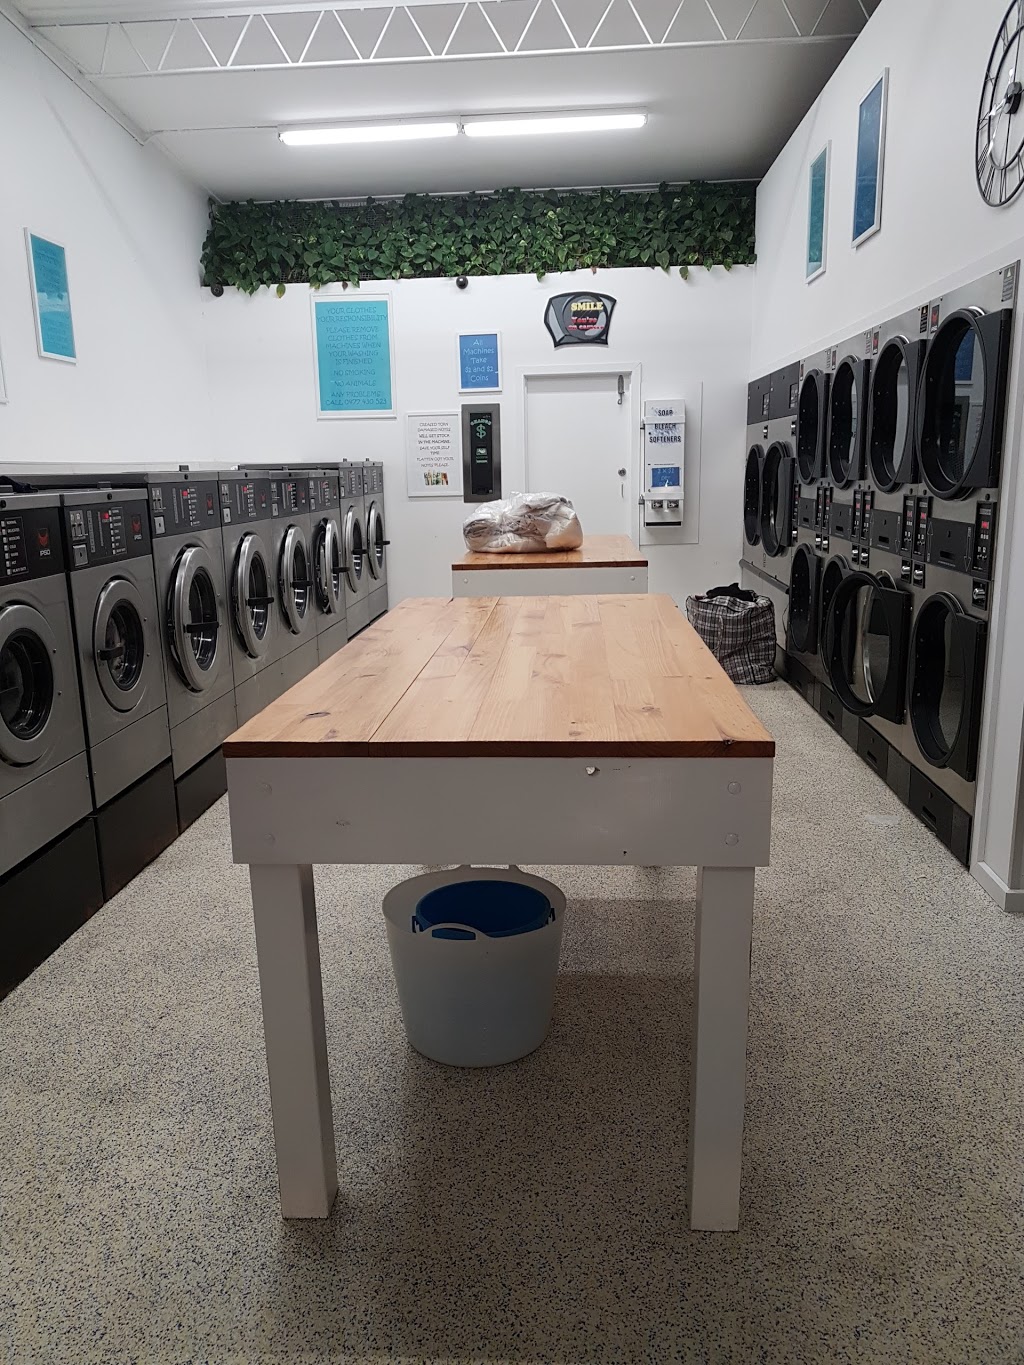 Coin Laundry | laundry | 37 Perth Ave, Albion VIC 3020, Australia | 0477430523 OR +61 477 430 523